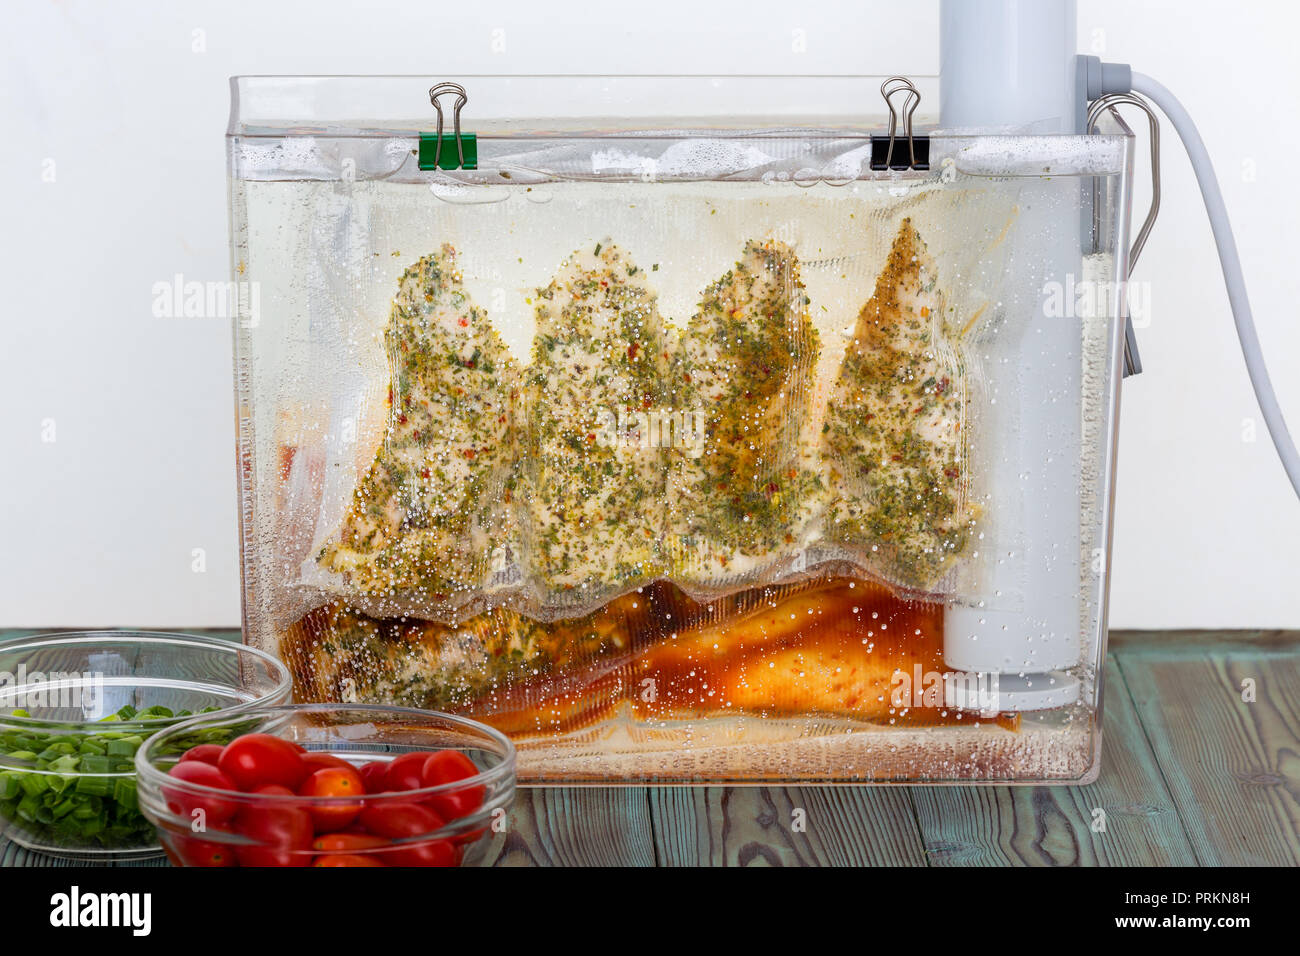 Three bags of chicken breasts with assorted marinades and seasoning hanging suspended in water sous-vide cooking at an even temperature Stock Photo